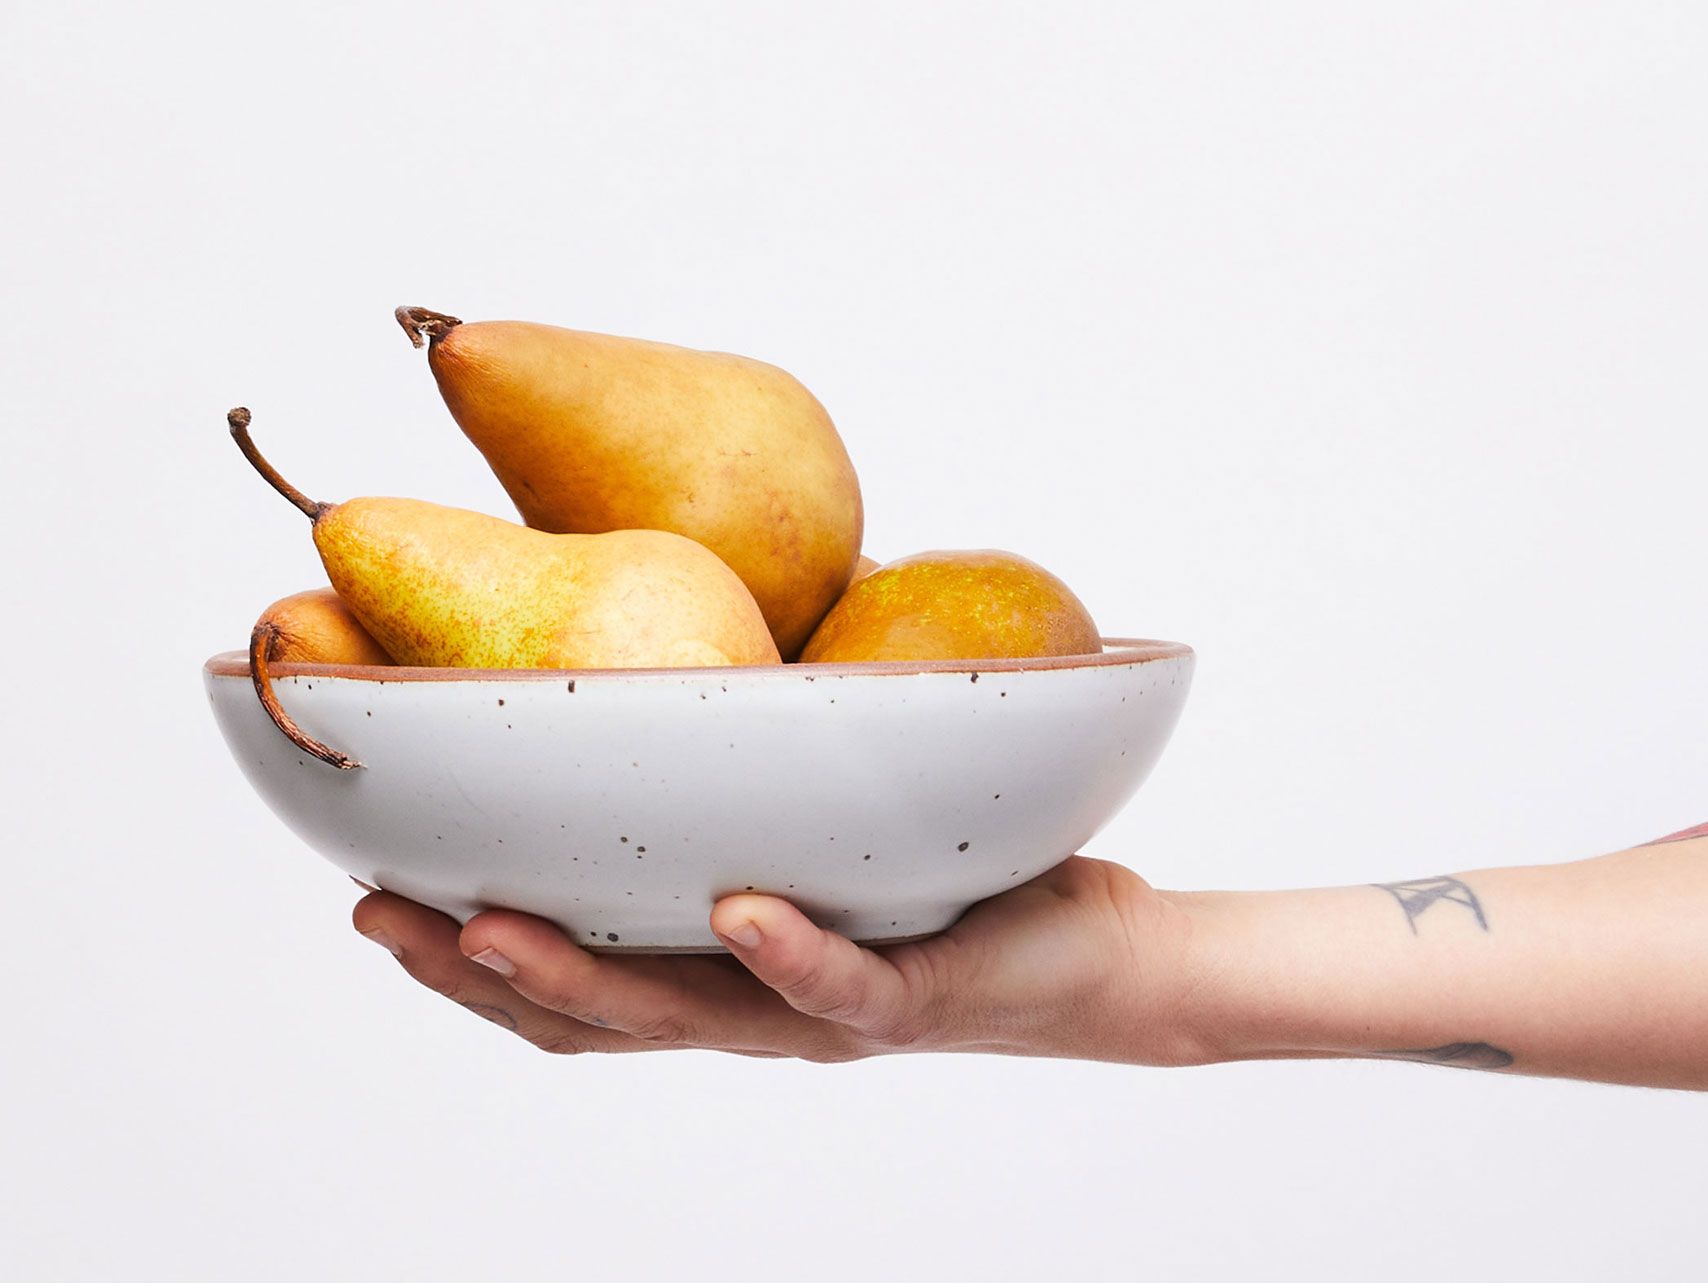 A hand holding an eggshell everyday bowl filled with pears